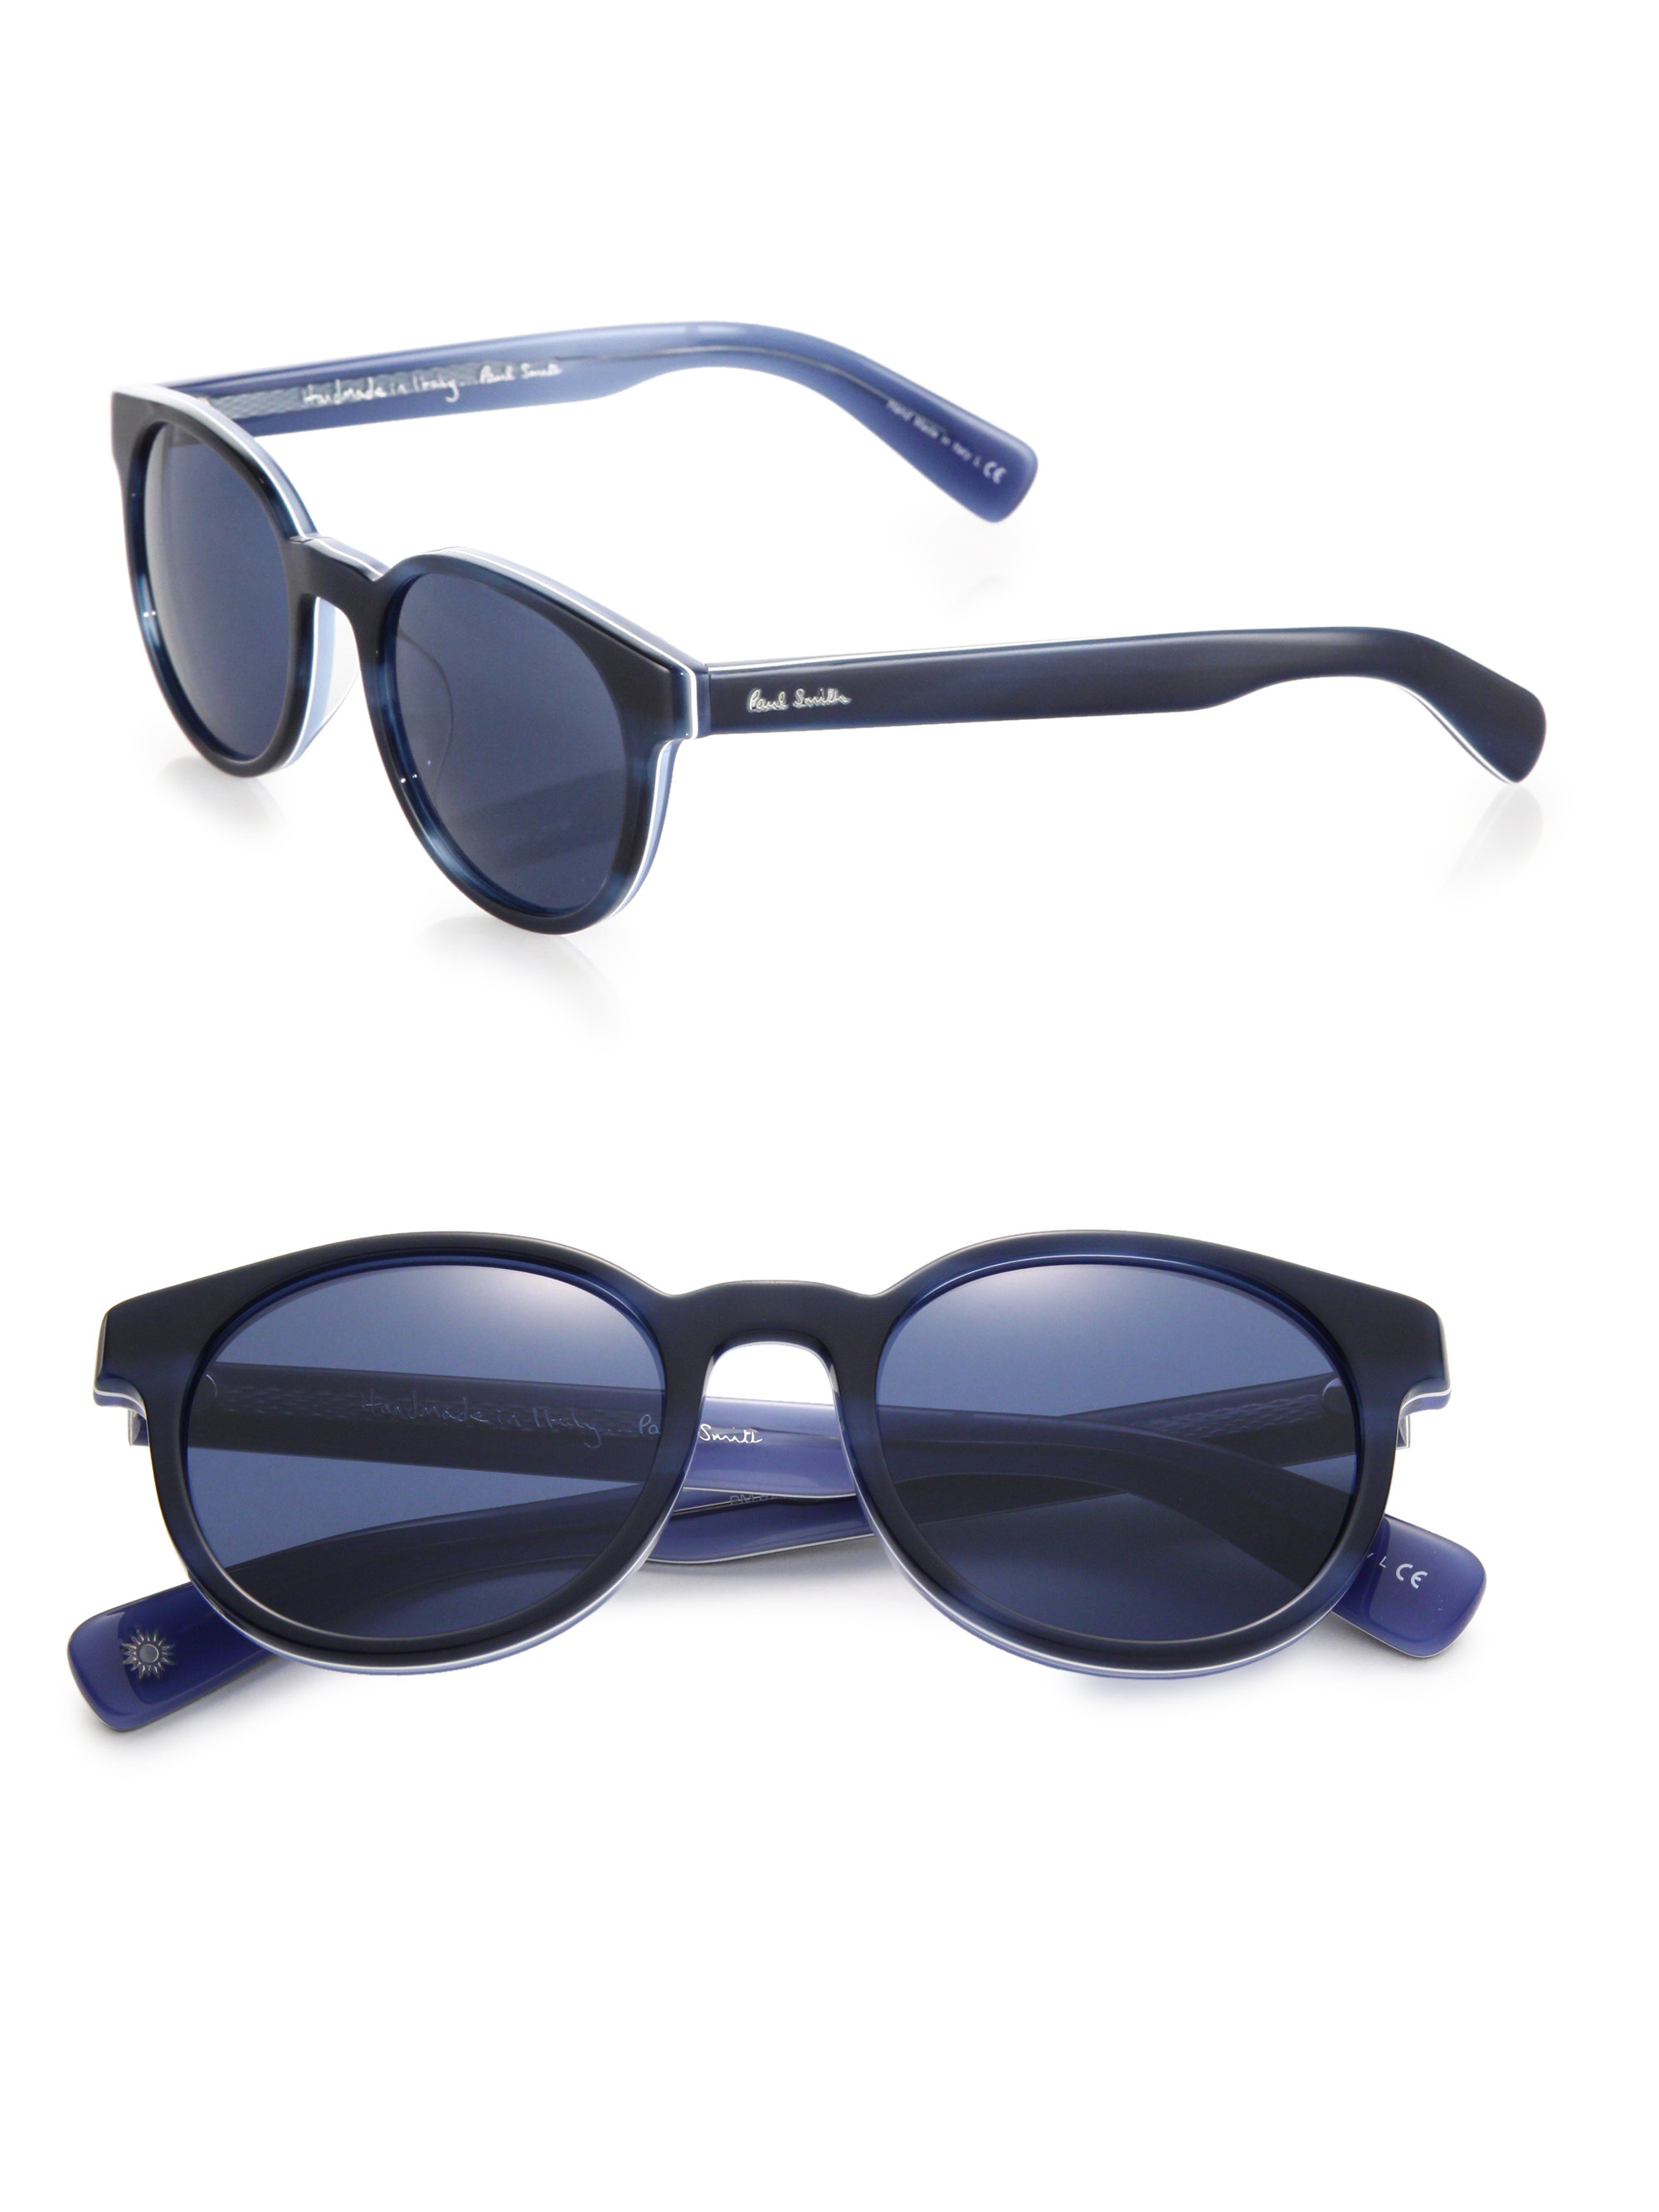 Paul Smith Synthetic Wayden 51mm Round Sunglasses in Blue for Men - Lyst